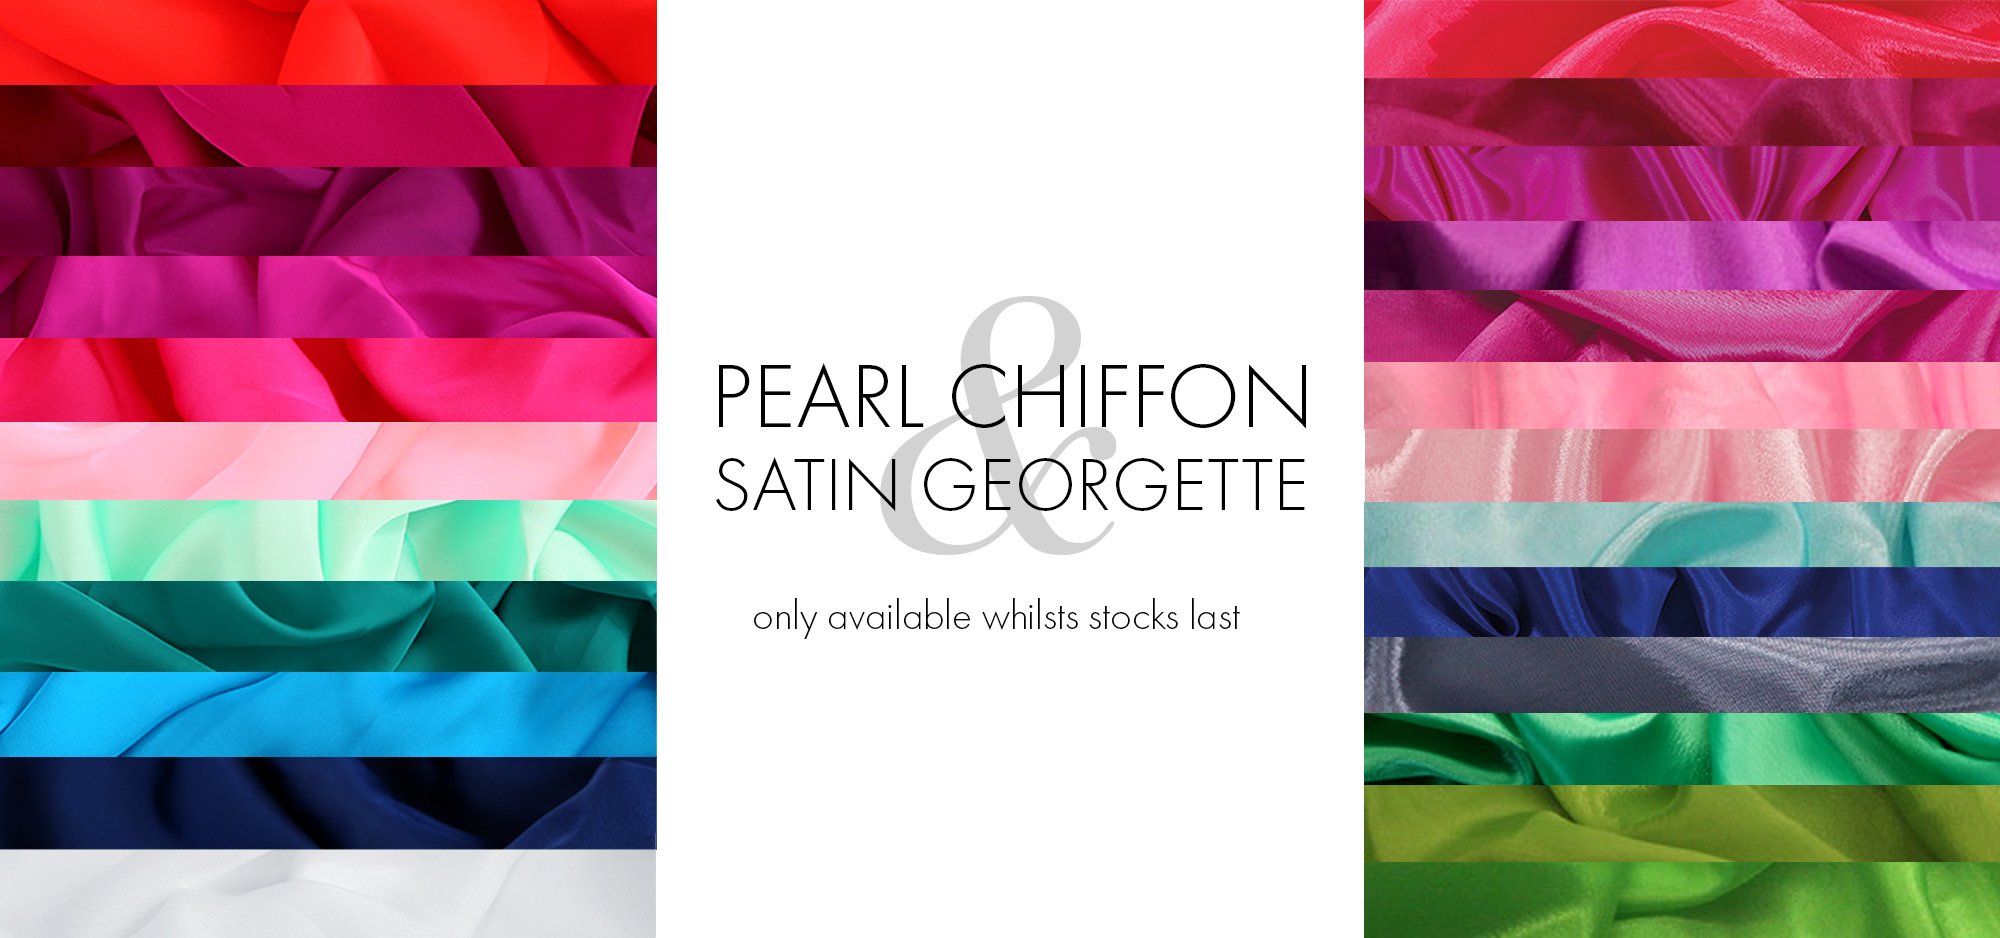 Float away with our satin georgette and pearl chiffon fabric range